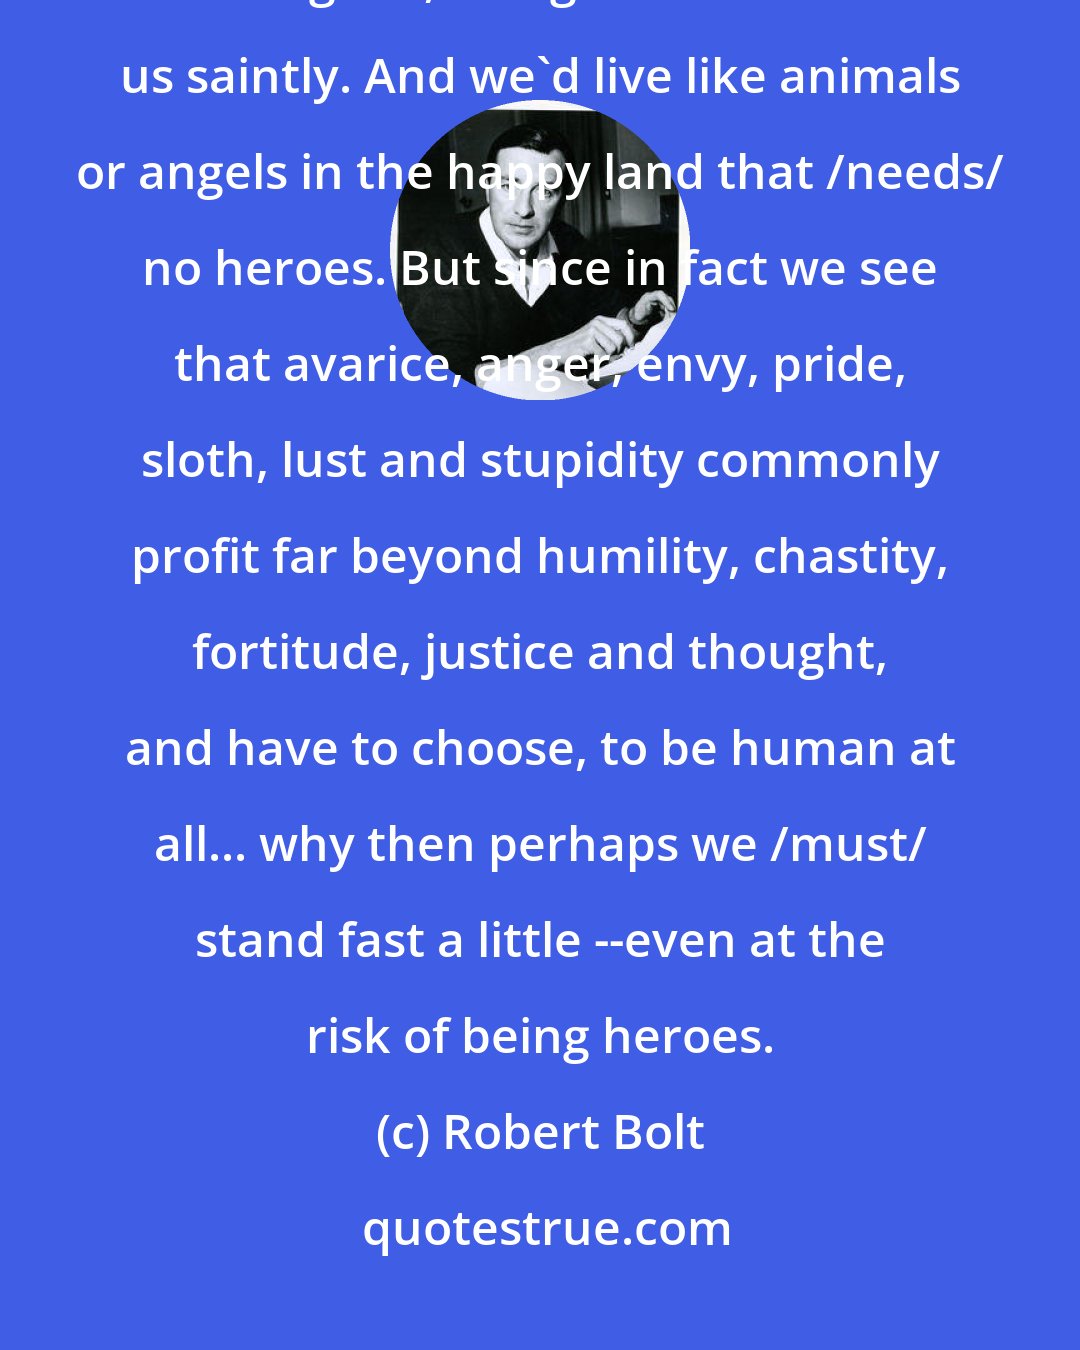 Robert Bolt: If we lived in a State where virtue was profitable, common sense would make us good, and greed would make us saintly. And we'd live like animals or angels in the happy land that /needs/ no heroes. But since in fact we see that avarice, anger, envy, pride, sloth, lust and stupidity commonly profit far beyond humility, chastity, fortitude, justice and thought, and have to choose, to be human at all... why then perhaps we /must/ stand fast a little --even at the risk of being heroes.